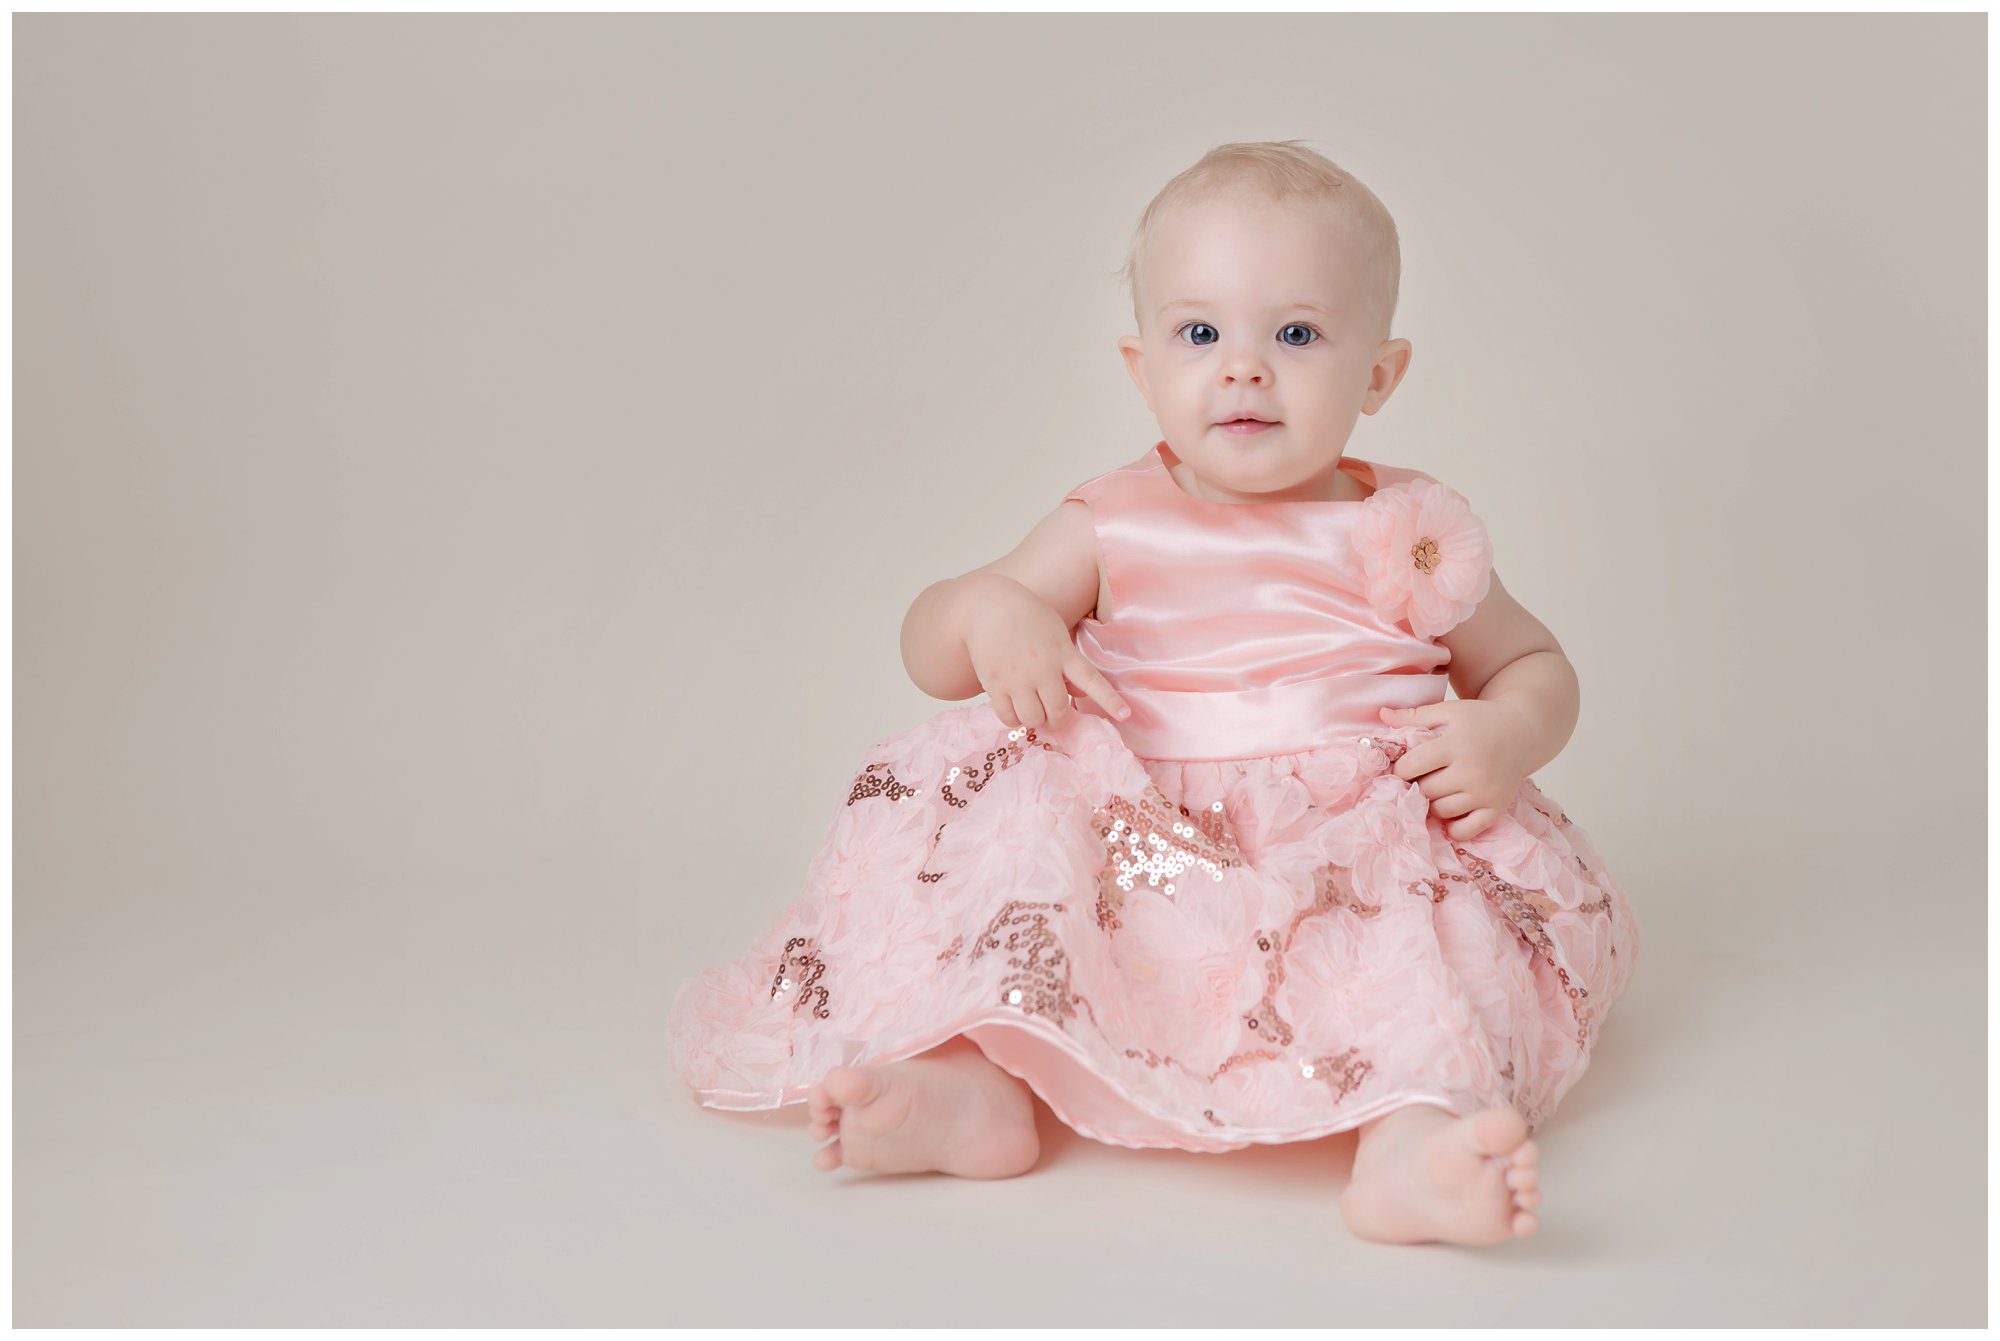 Bring a few outfits for a few baby portraits